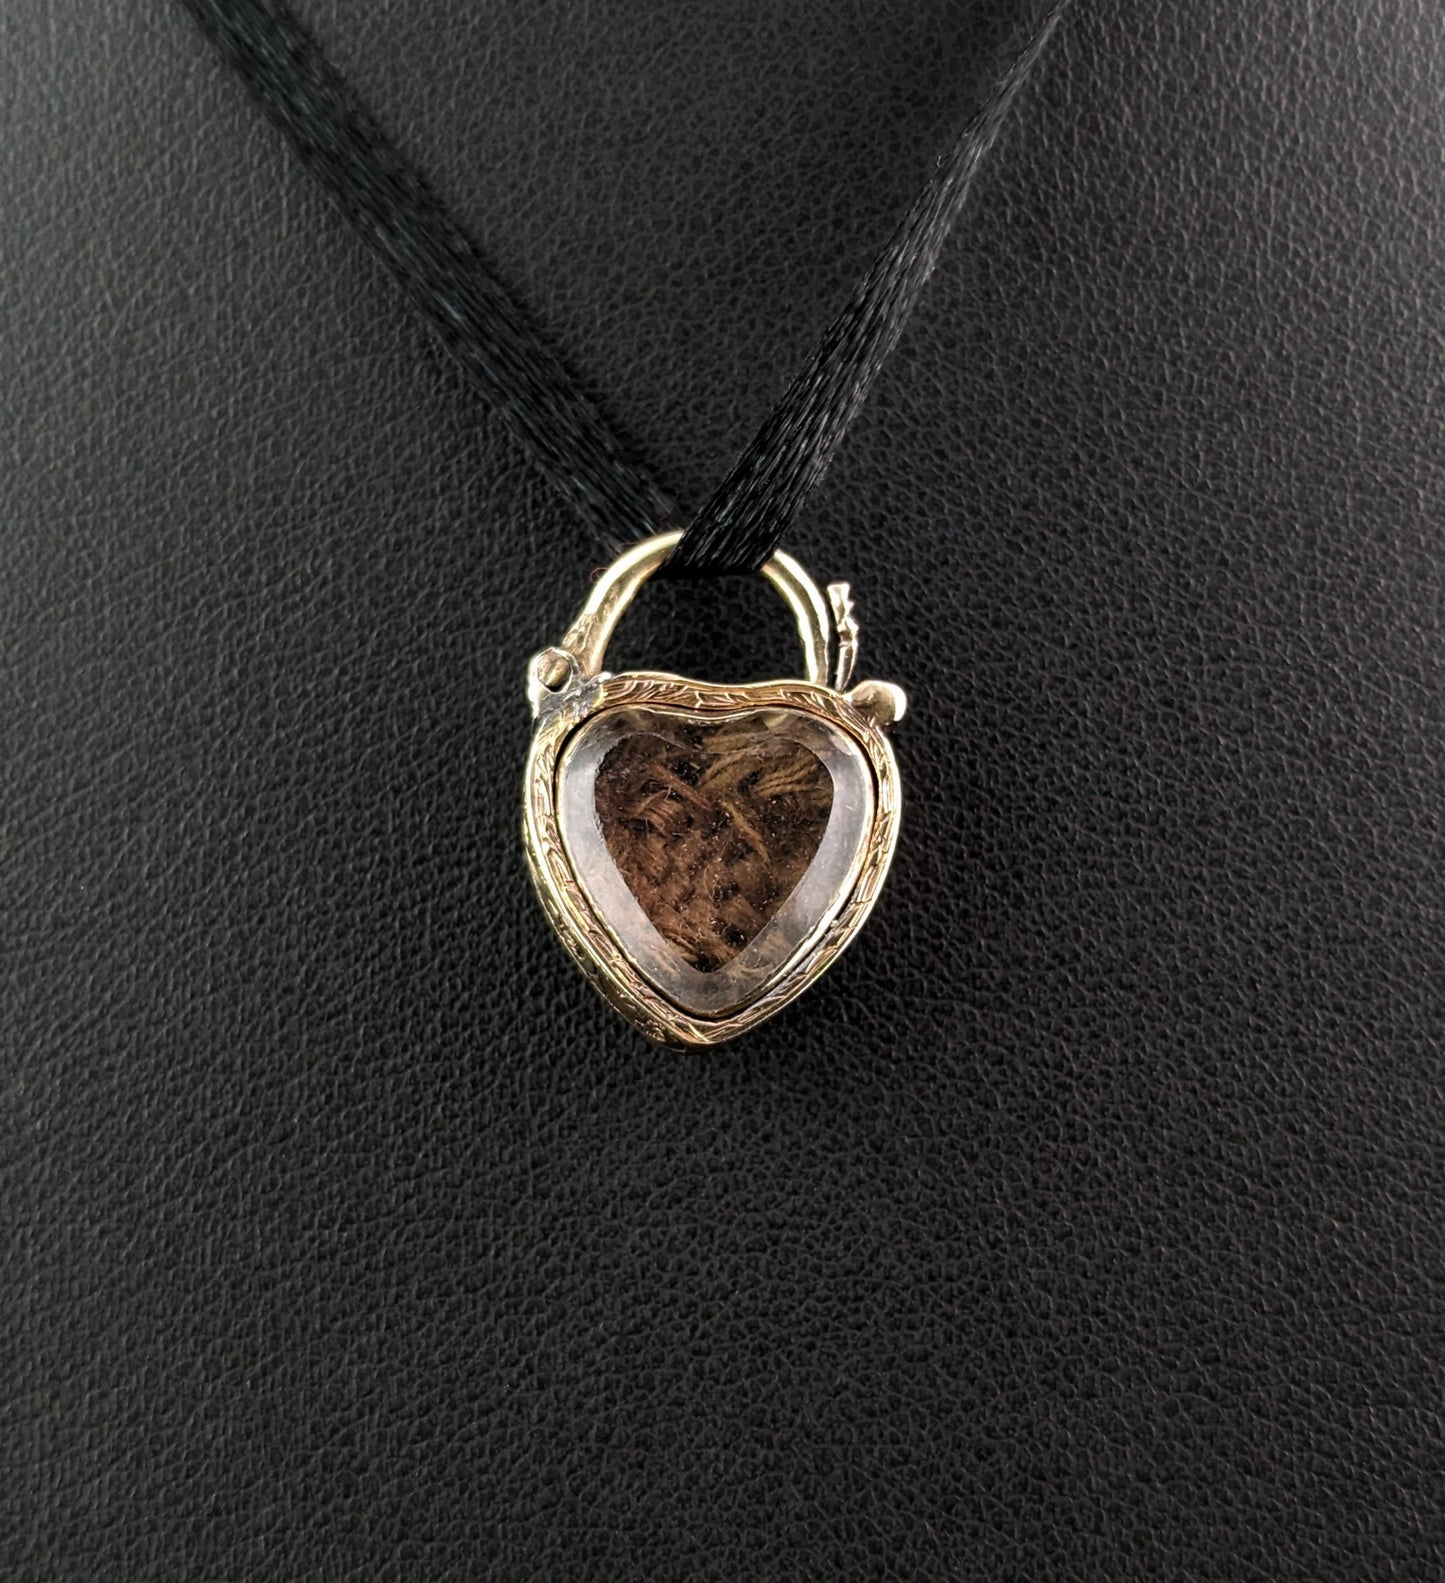 Antique Mourning heart padlock pendant, Agate and Hairwork, 9ct gold